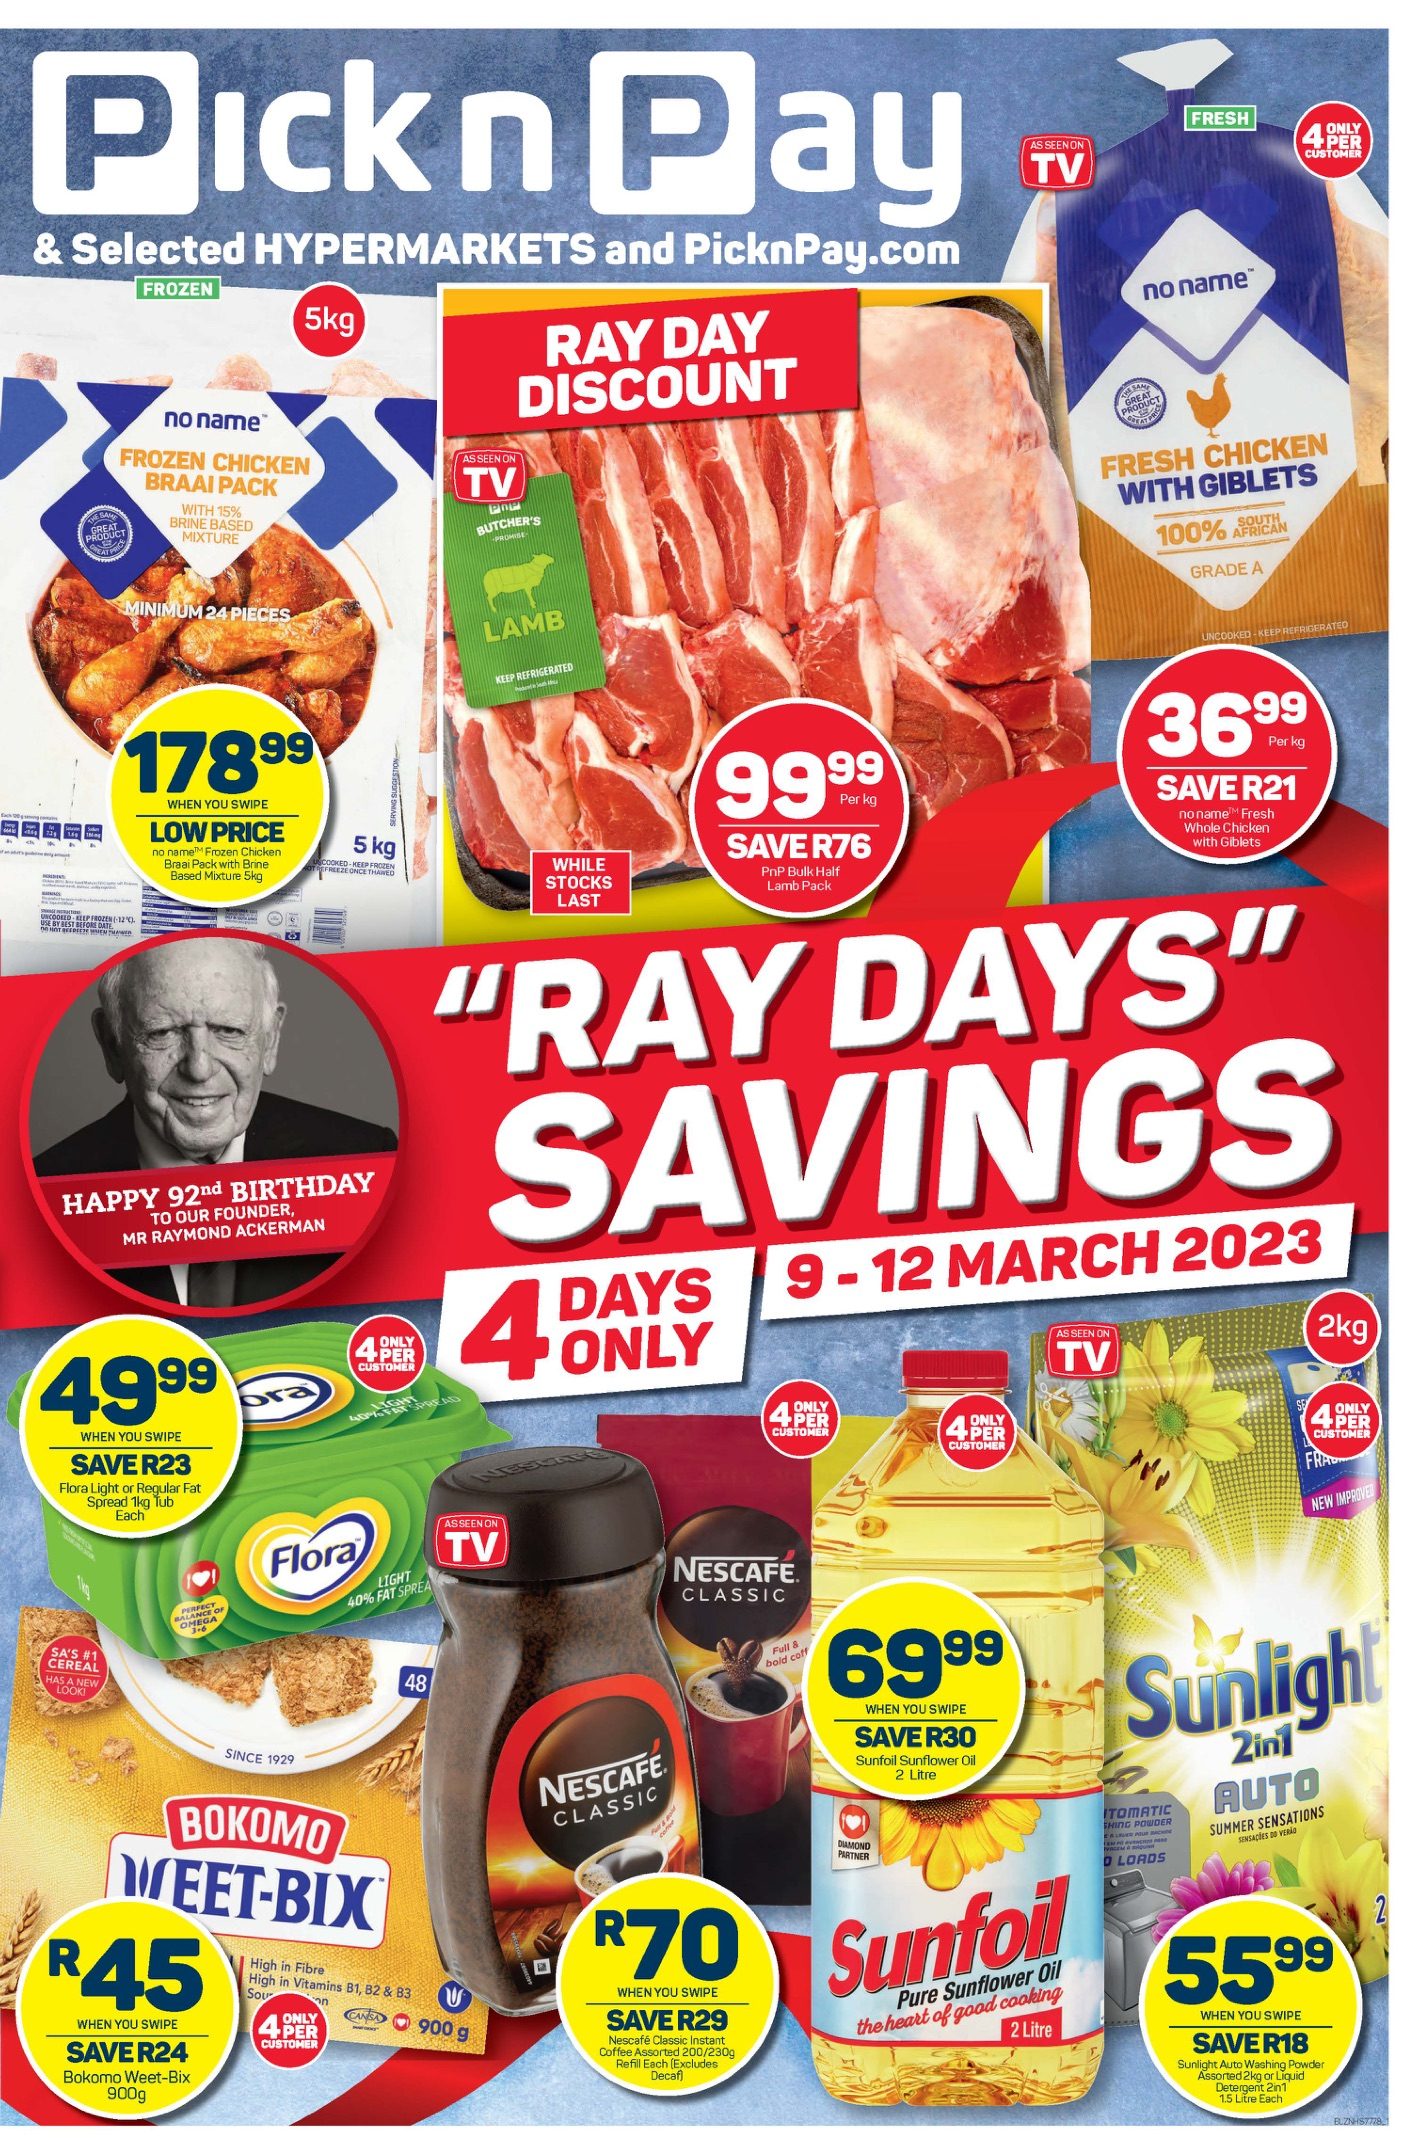 pick-n-pay-specials-9-march-2023-pick-n-pay-catalogue-rayday